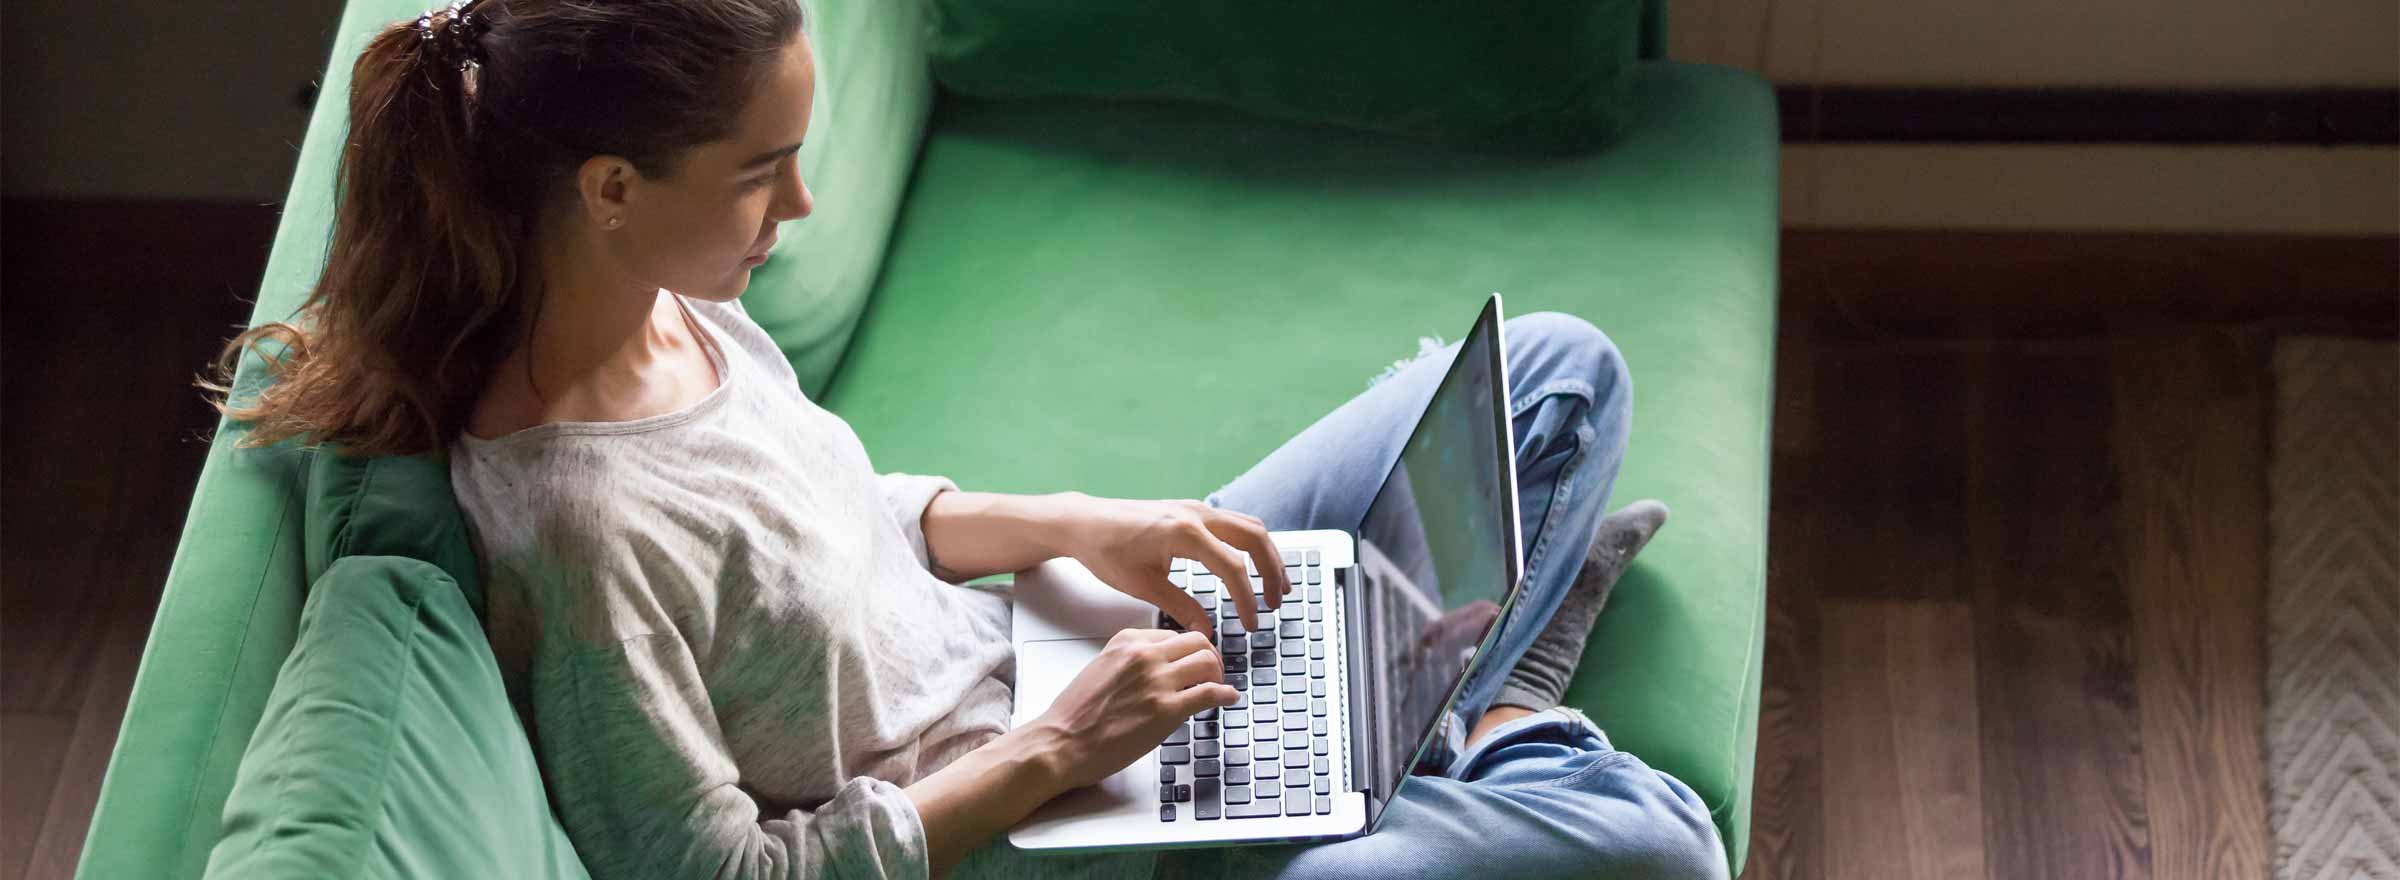 woman sitting cross-legged on a sofa and using a laptop